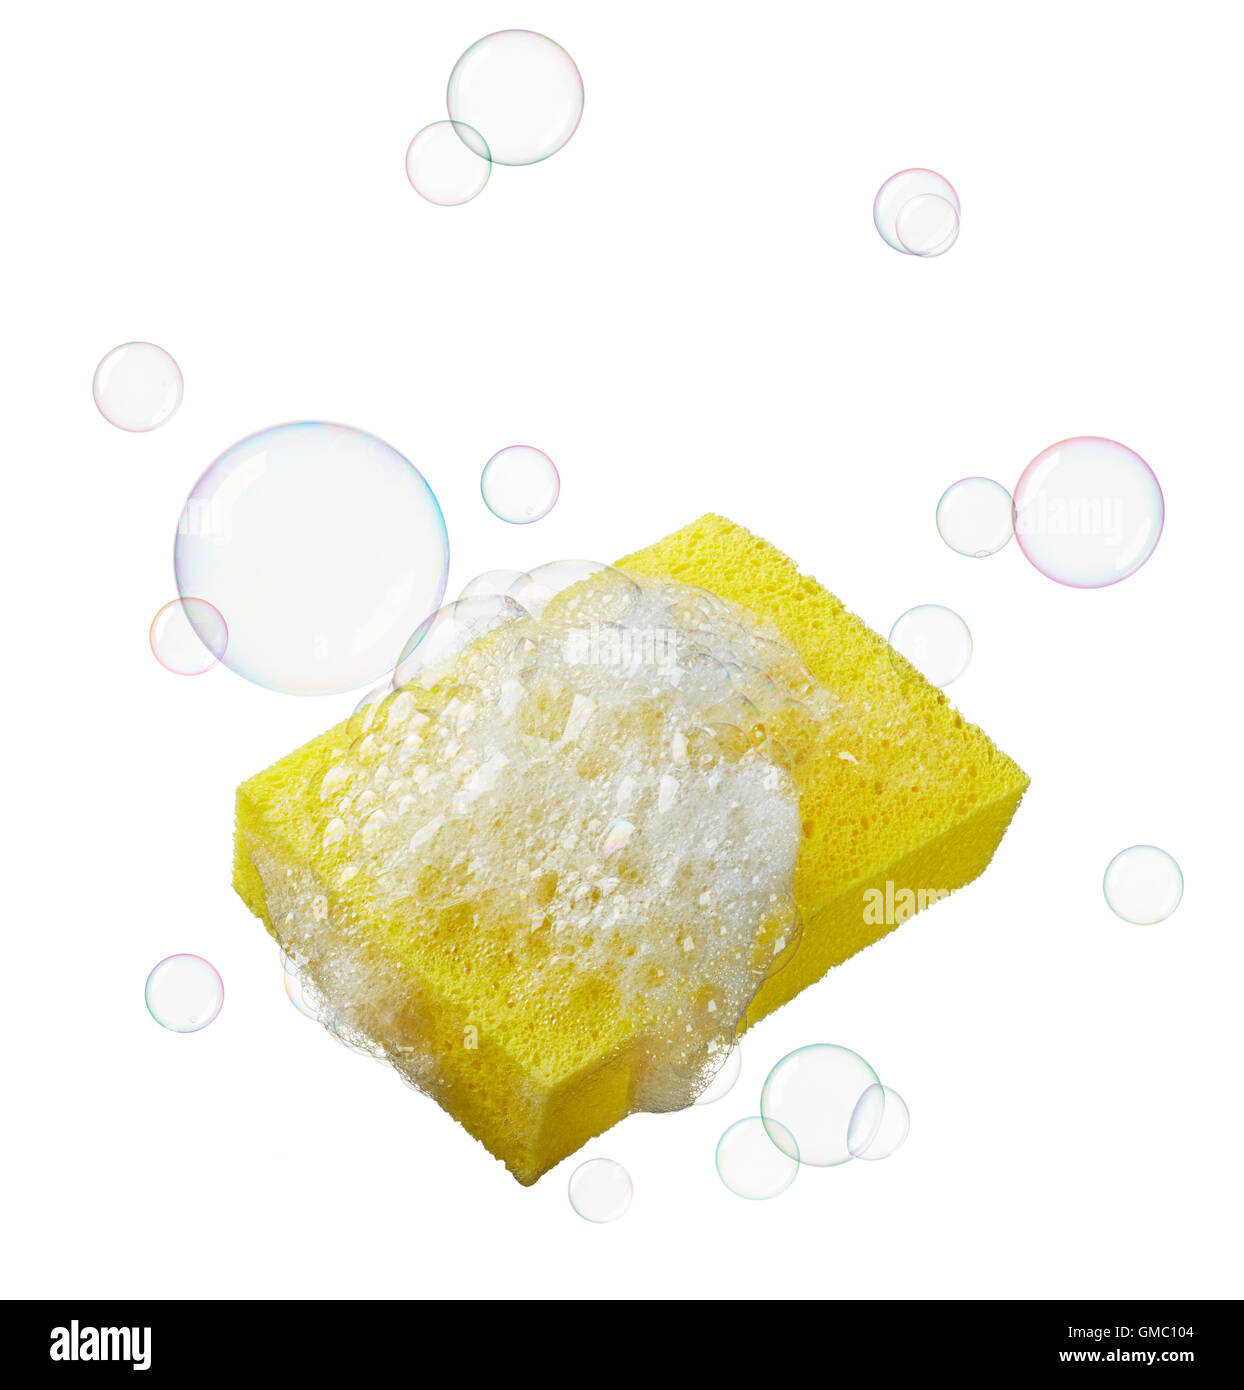 yellow sponge with lots of soaps and bubbles Stock Photo